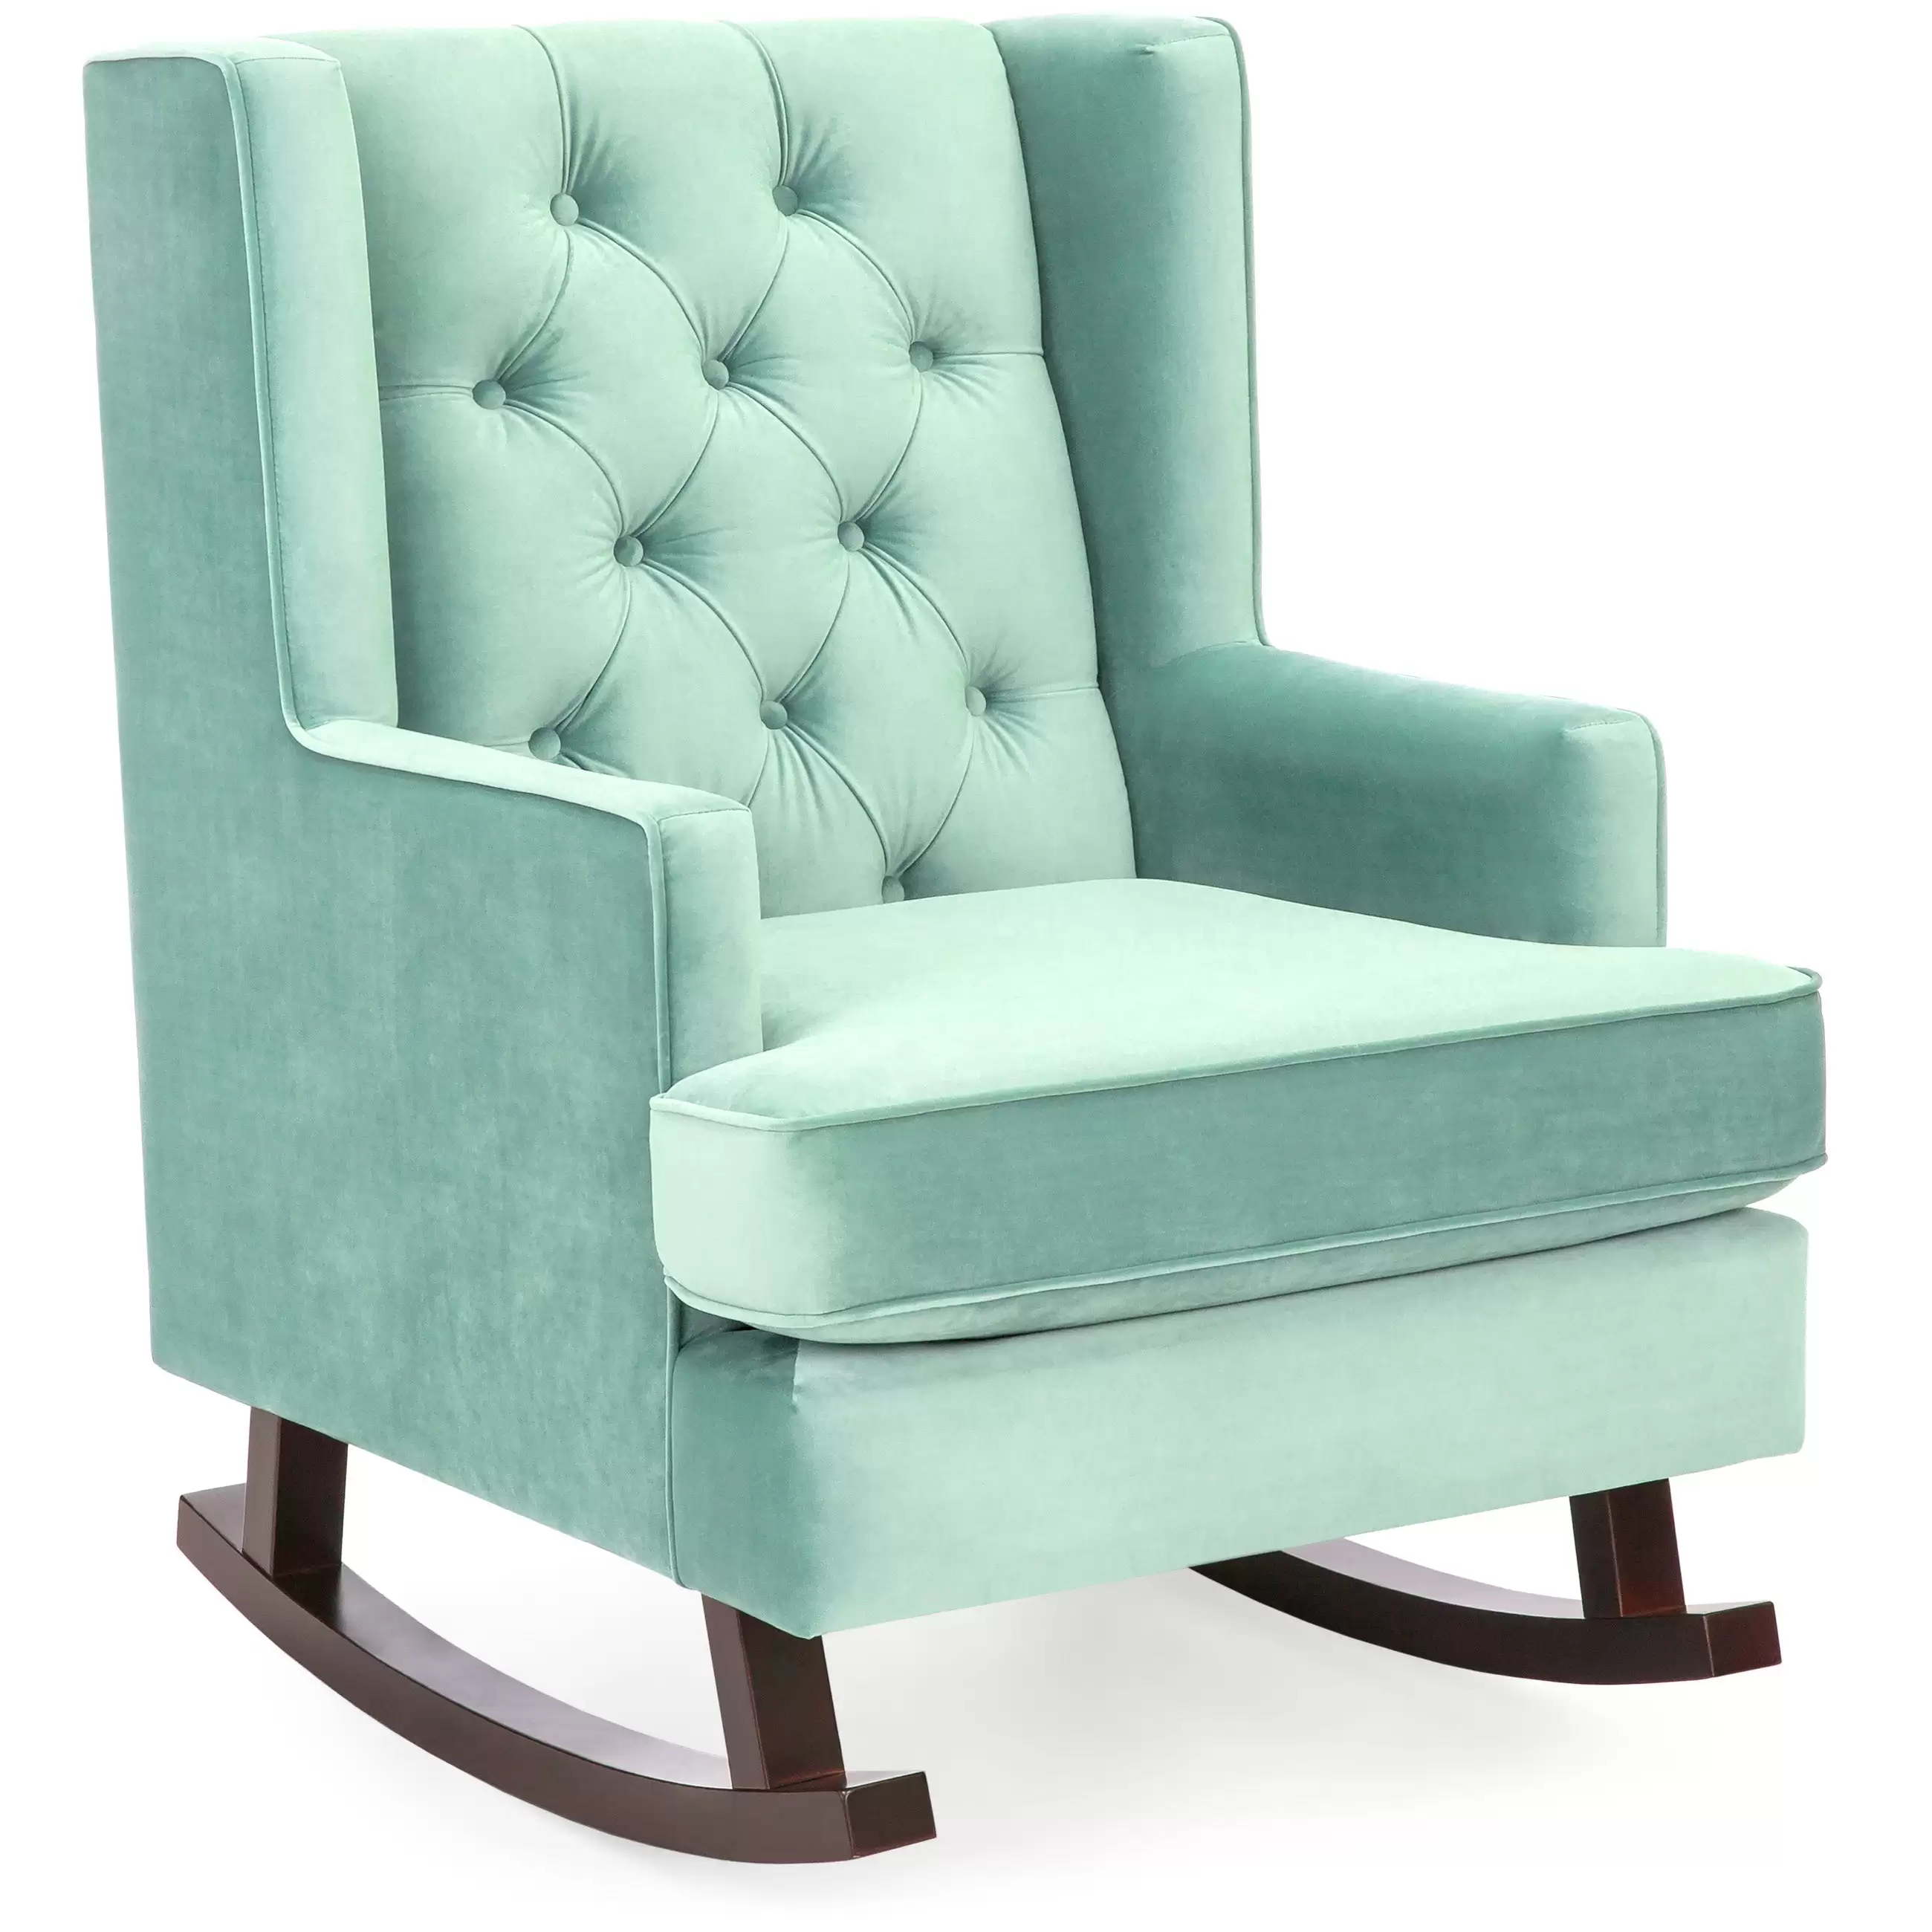 Pay $199.99 Tufted Upholstered Wingback Rocking Chair With This Bestchoiceproducts Discount Voucher